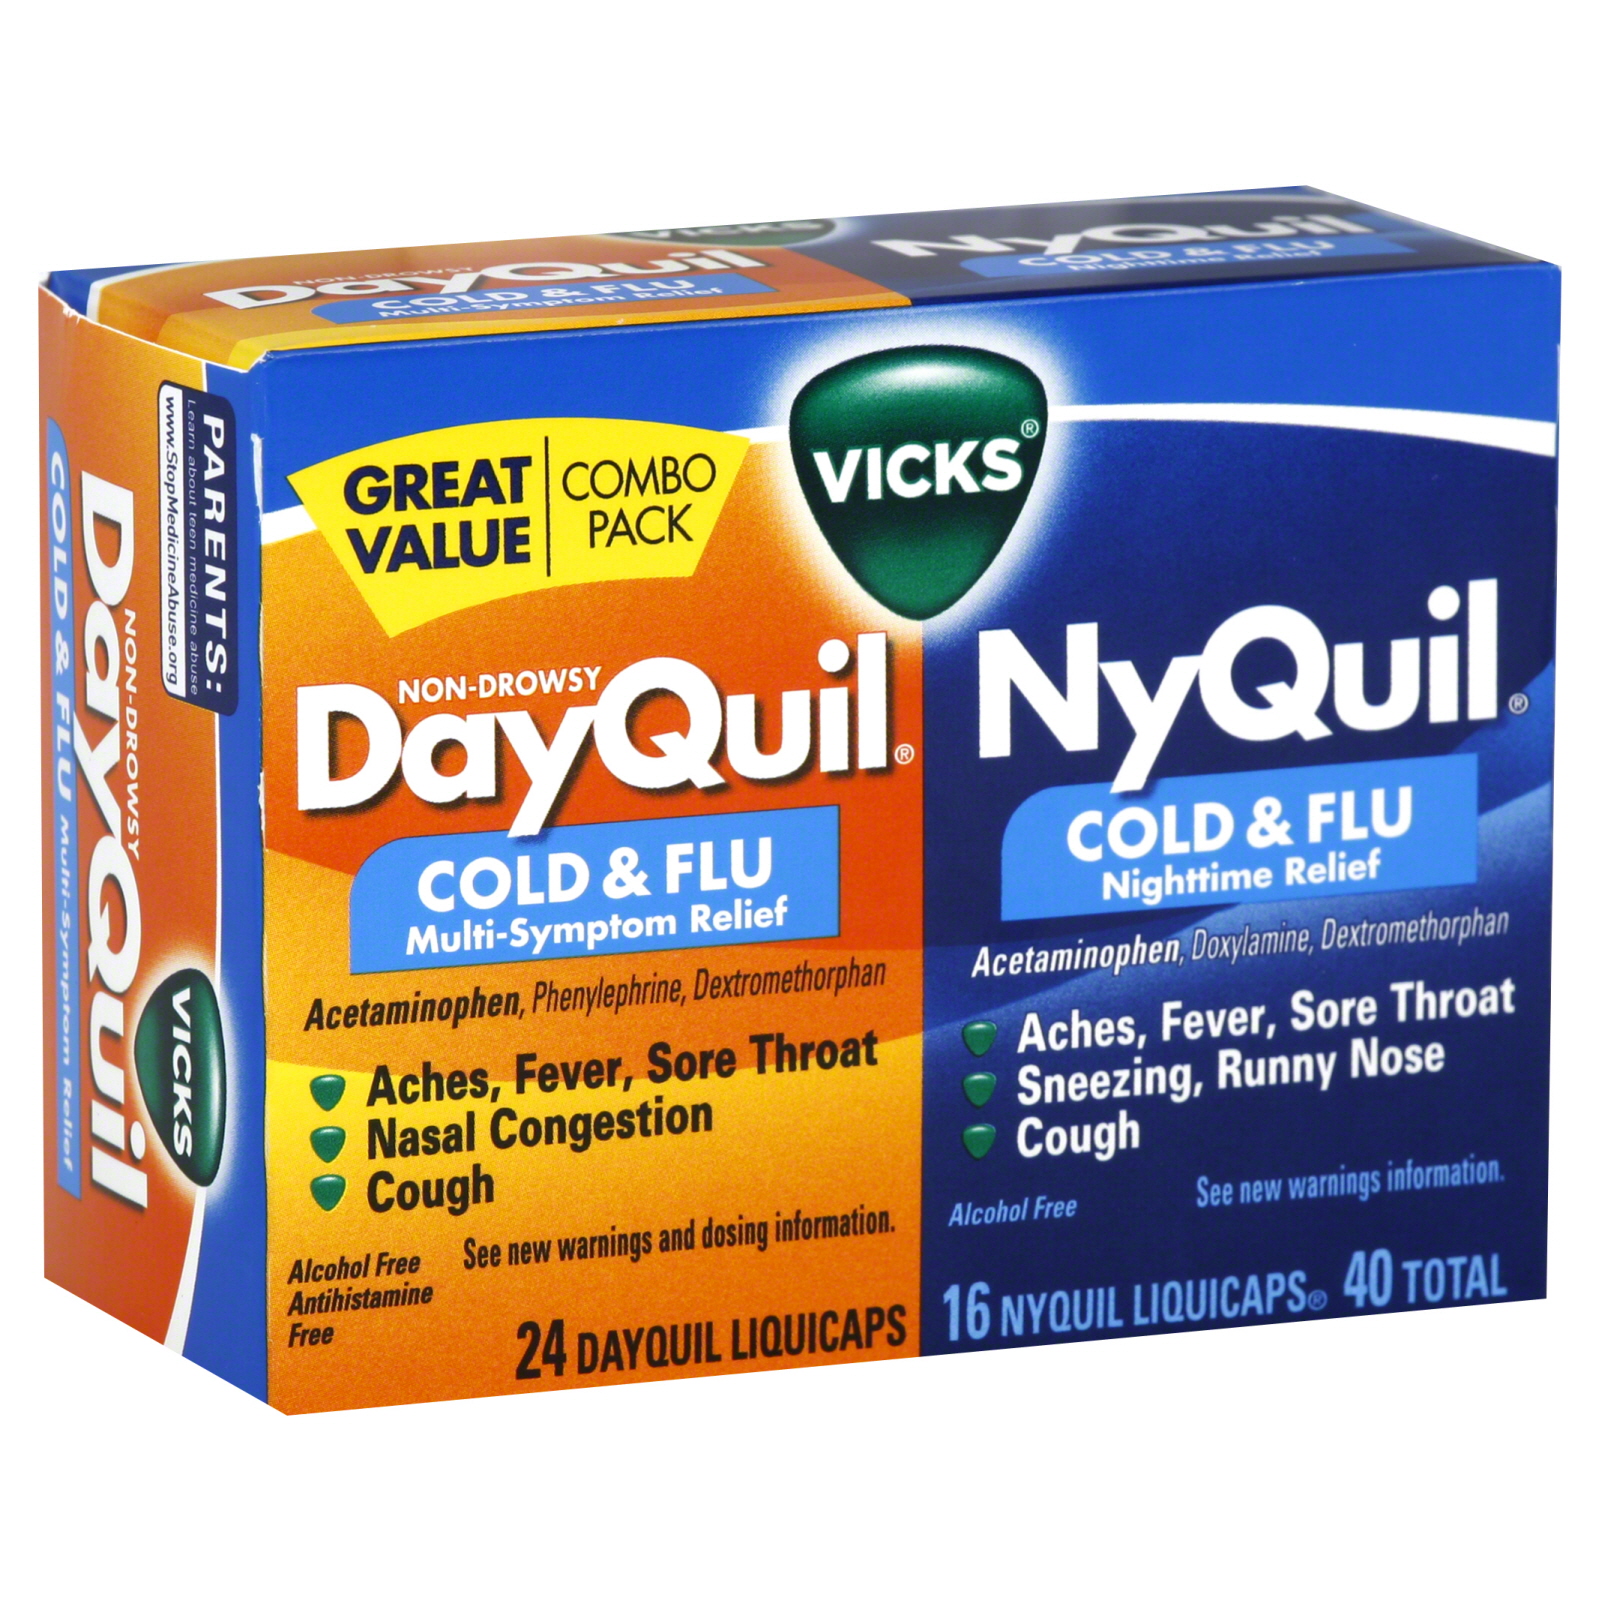 Vicks DayQuil NyQuil Combo Pack Cold & Flu, Multi-Symptom Relief, Nighttime Relief, LiquiCaps, 40 liquicaps